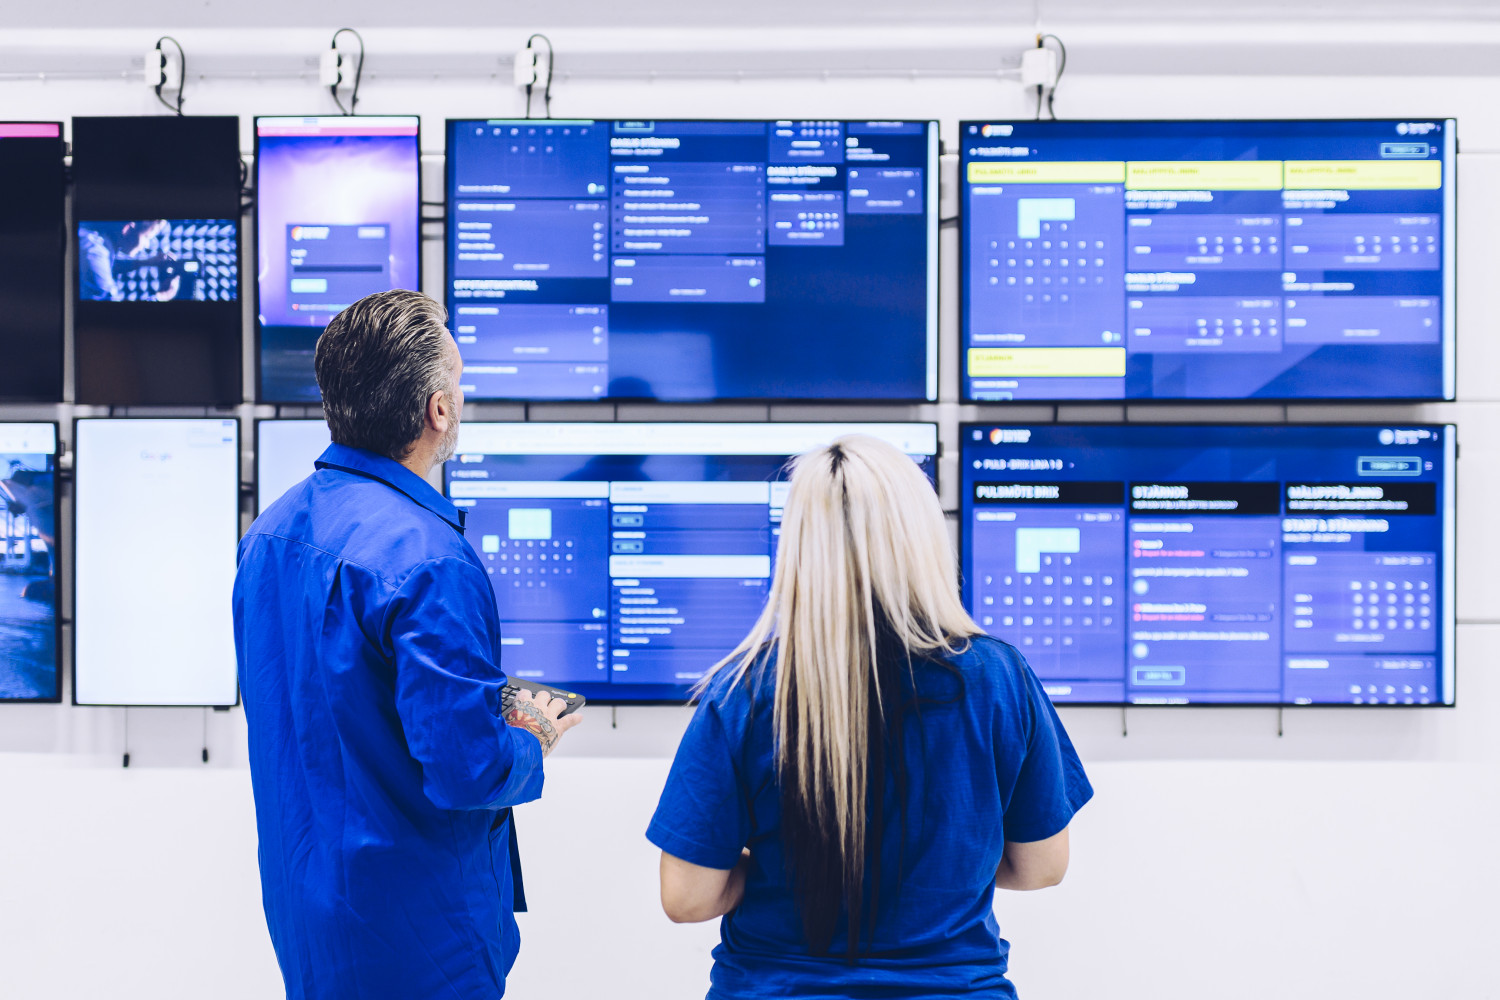 A man and a woman in blue overalls are looking at several large computer screens in a clean industrial environment.